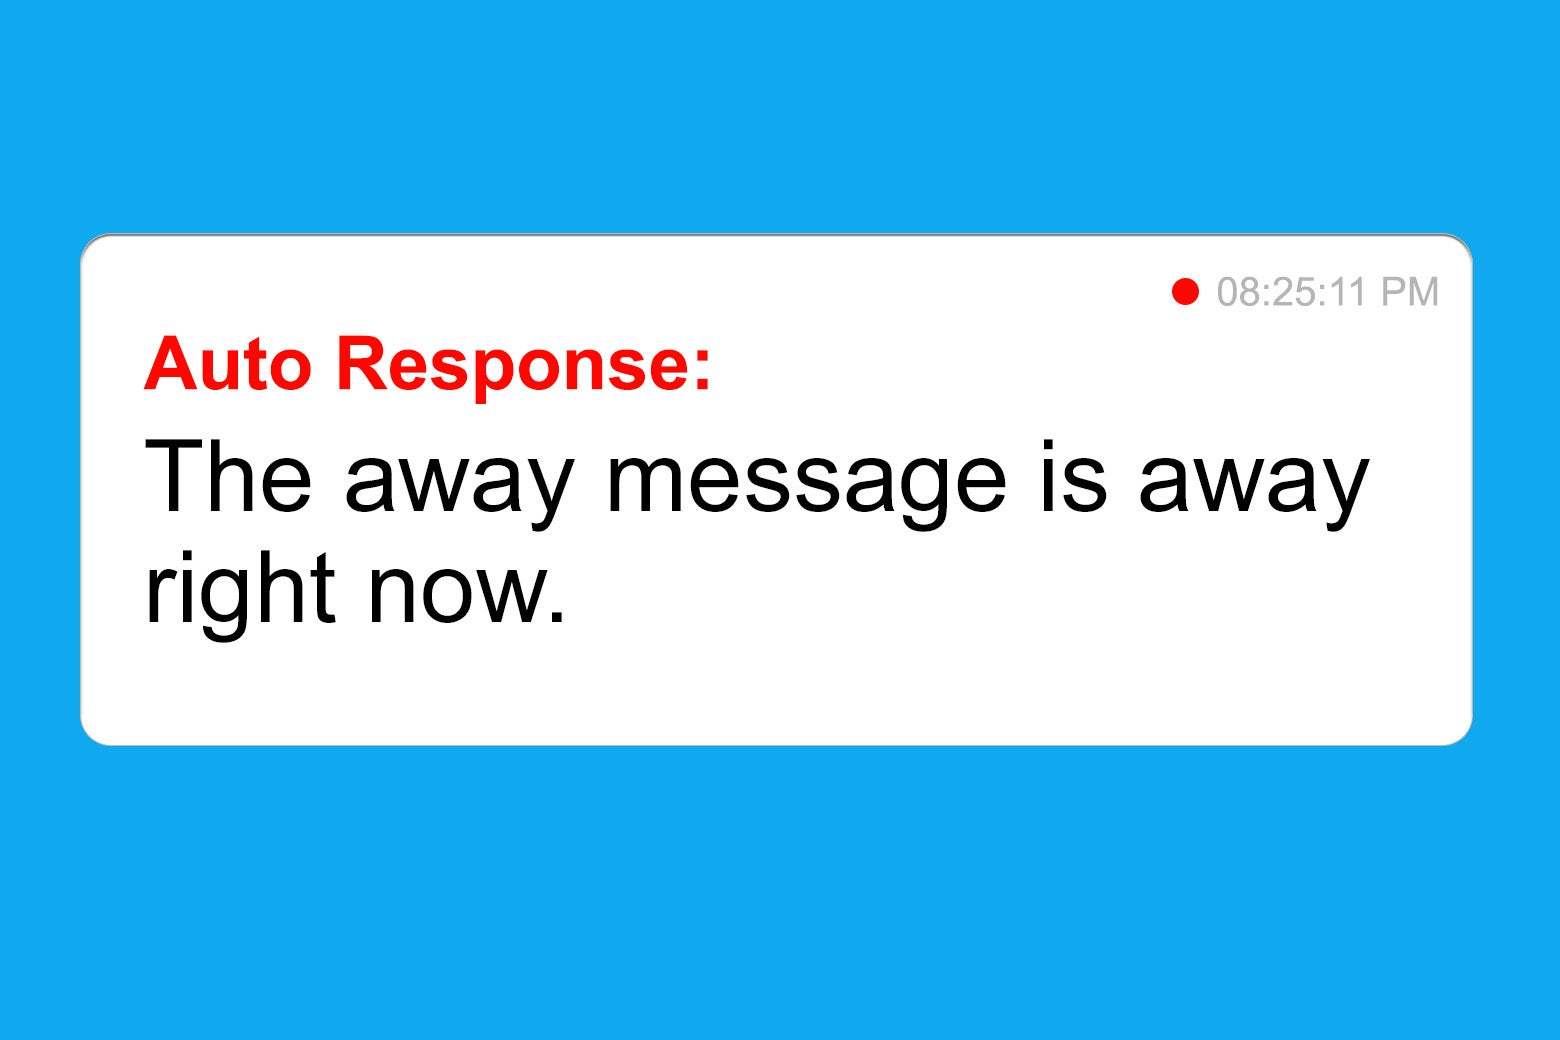 aim away messages video game taking up screen